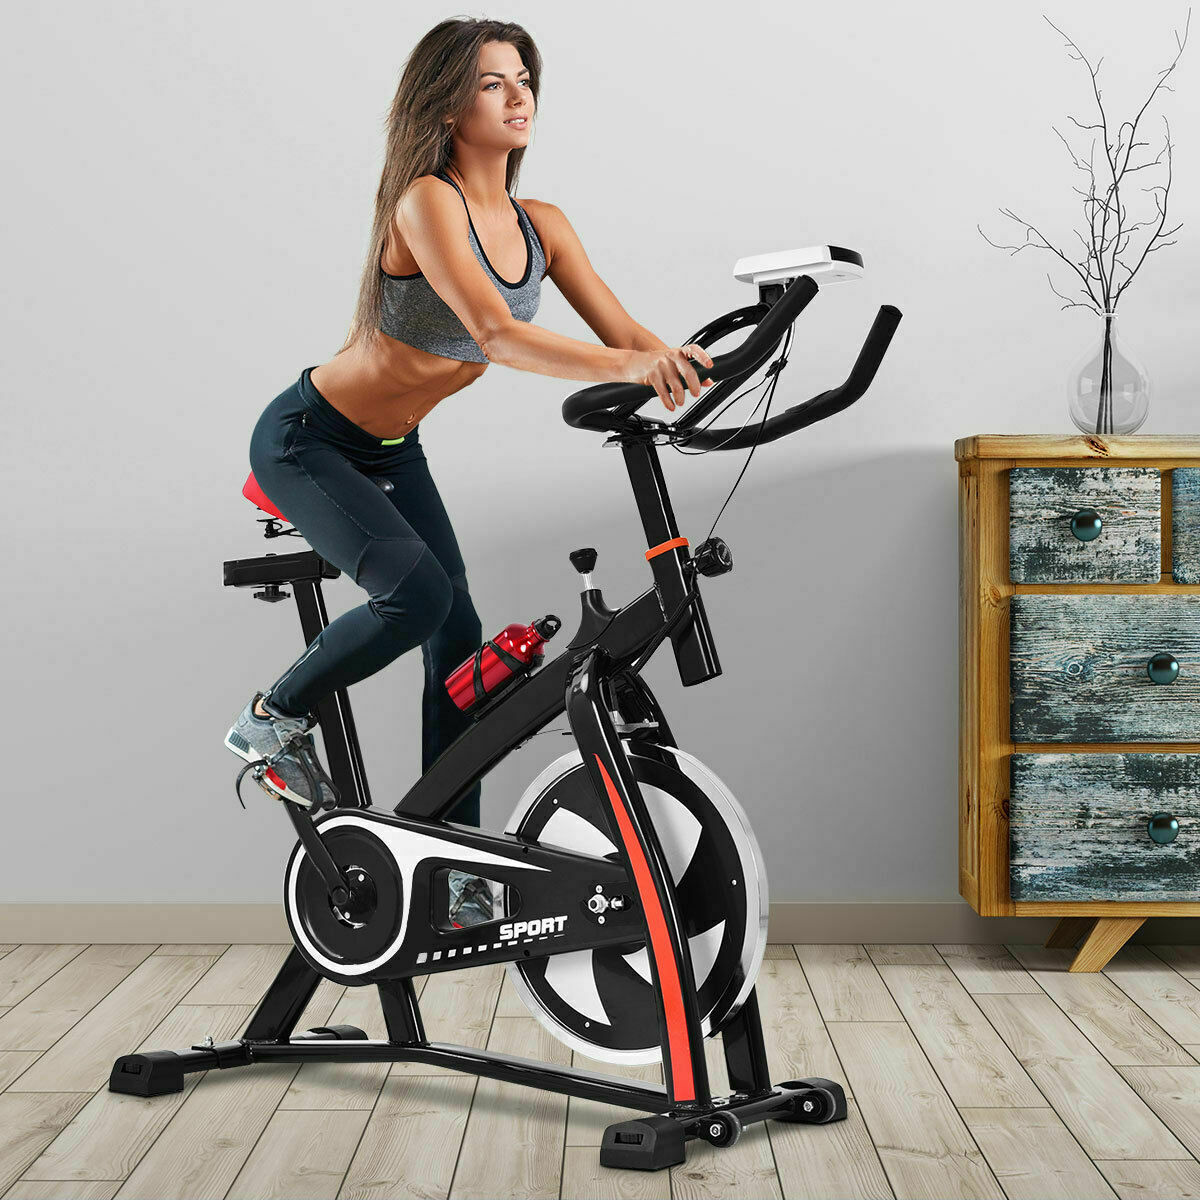 Costway Exercise Bicycle Indoor Bike Cycling Cardio Adjustable Gym Workout Fitness Home - image 2 of 9